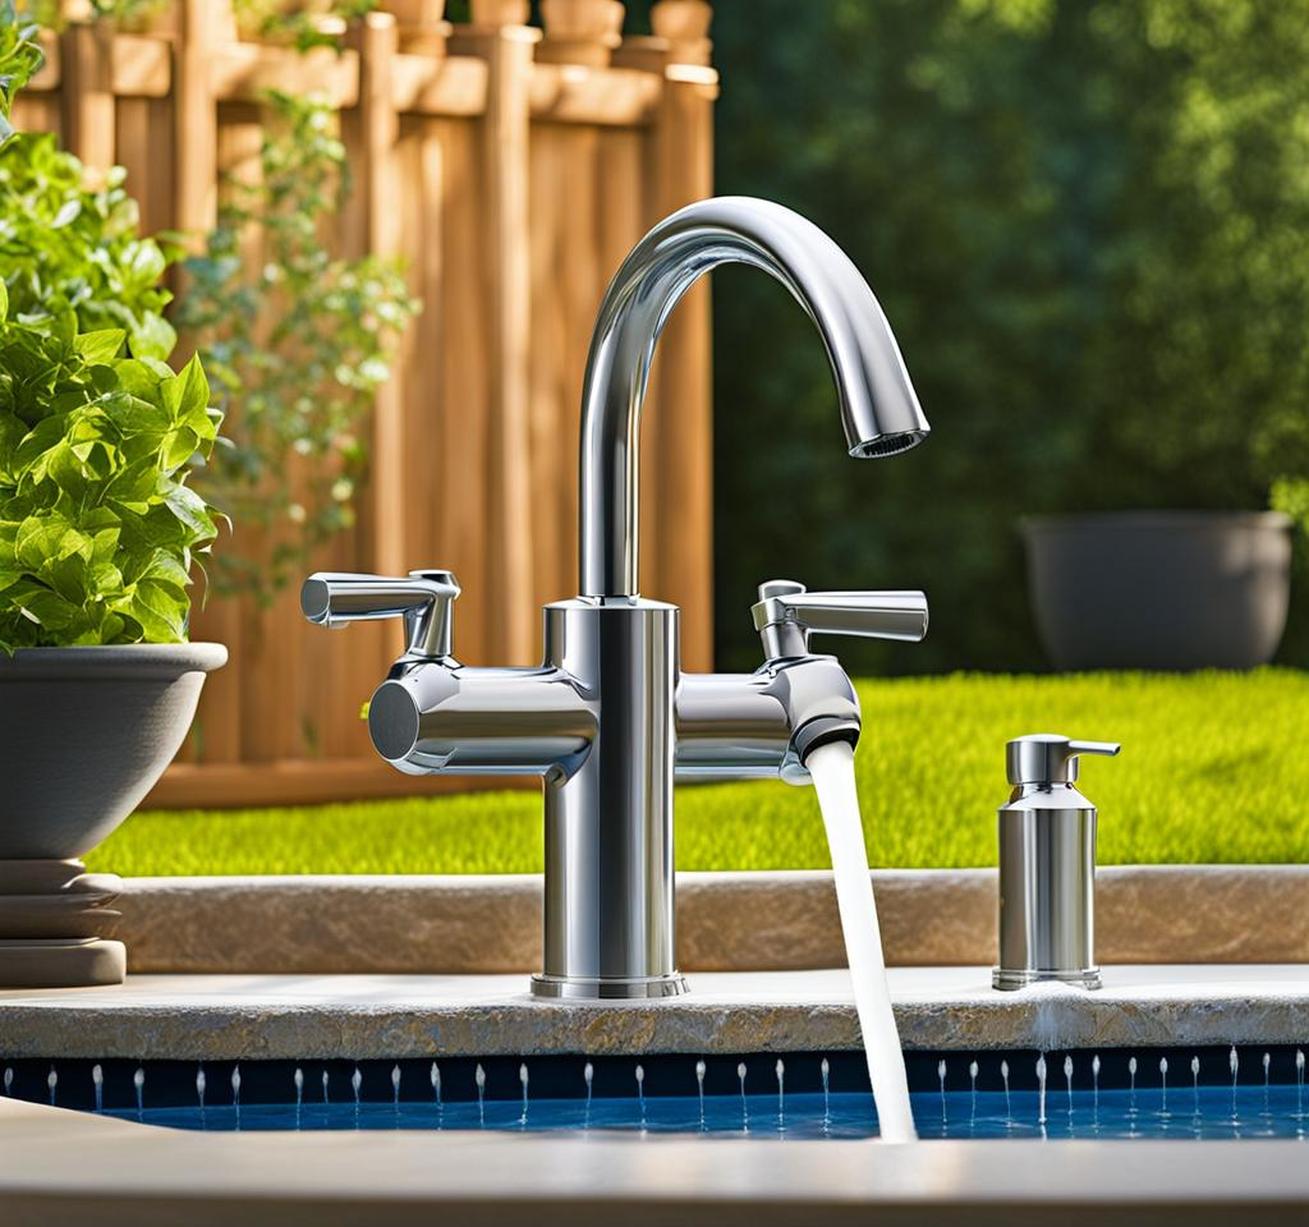 extension for outdoor faucet